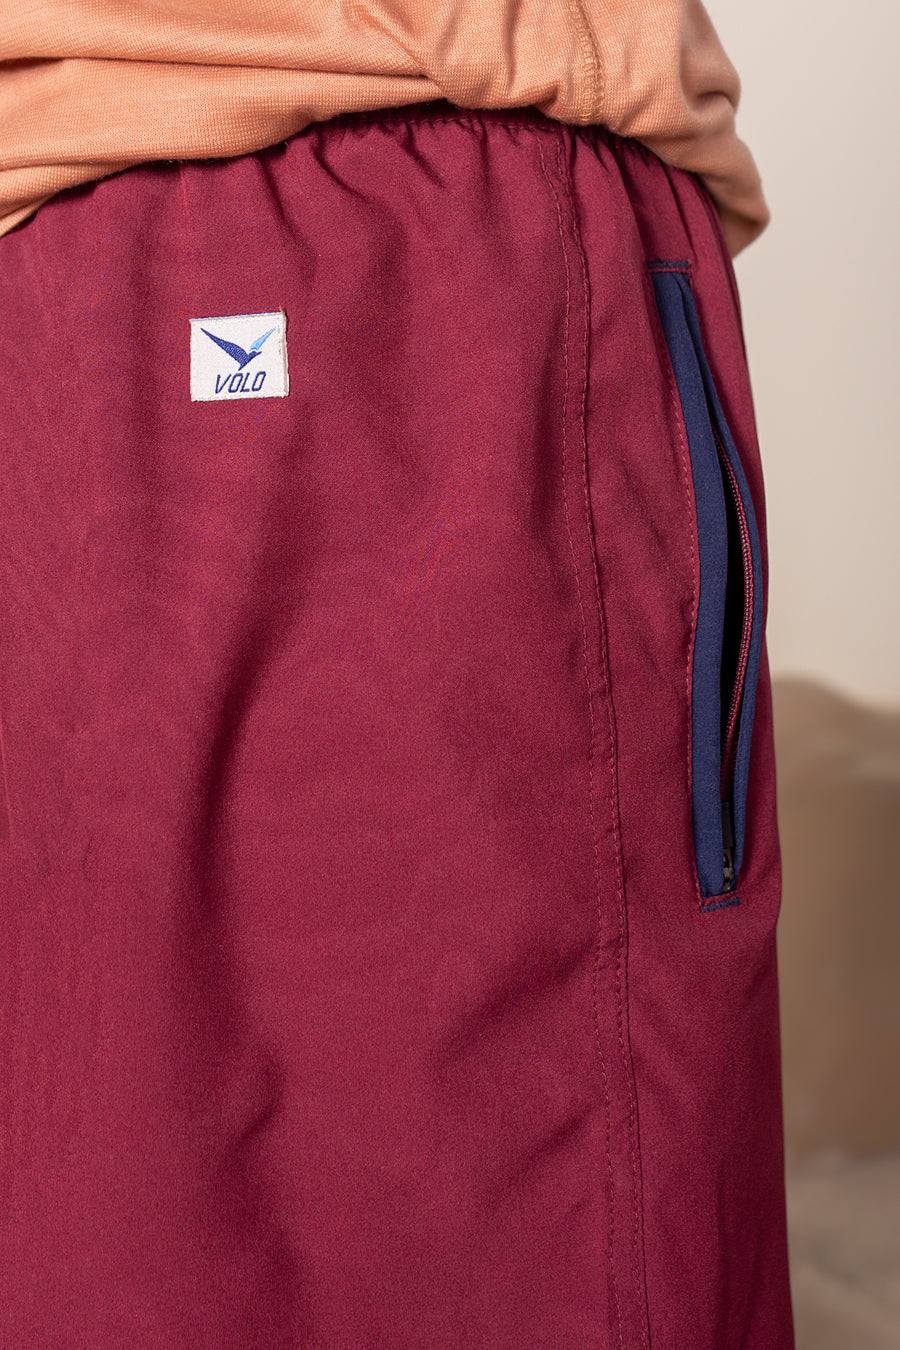 Men's Earth Shorts in Maroon | VOLO Apparel | Designed to fit into your active life without looking like athletic wear. Earth Shorts 2.0 come with a super strong ultralight microstretch fabric and a five pocket design. Two zipper pockets, a security pocket and super quick drying material. The shorts feature an internal drawstring and are reinforced stitched and ultra durable for all your adventures in or out of the city.